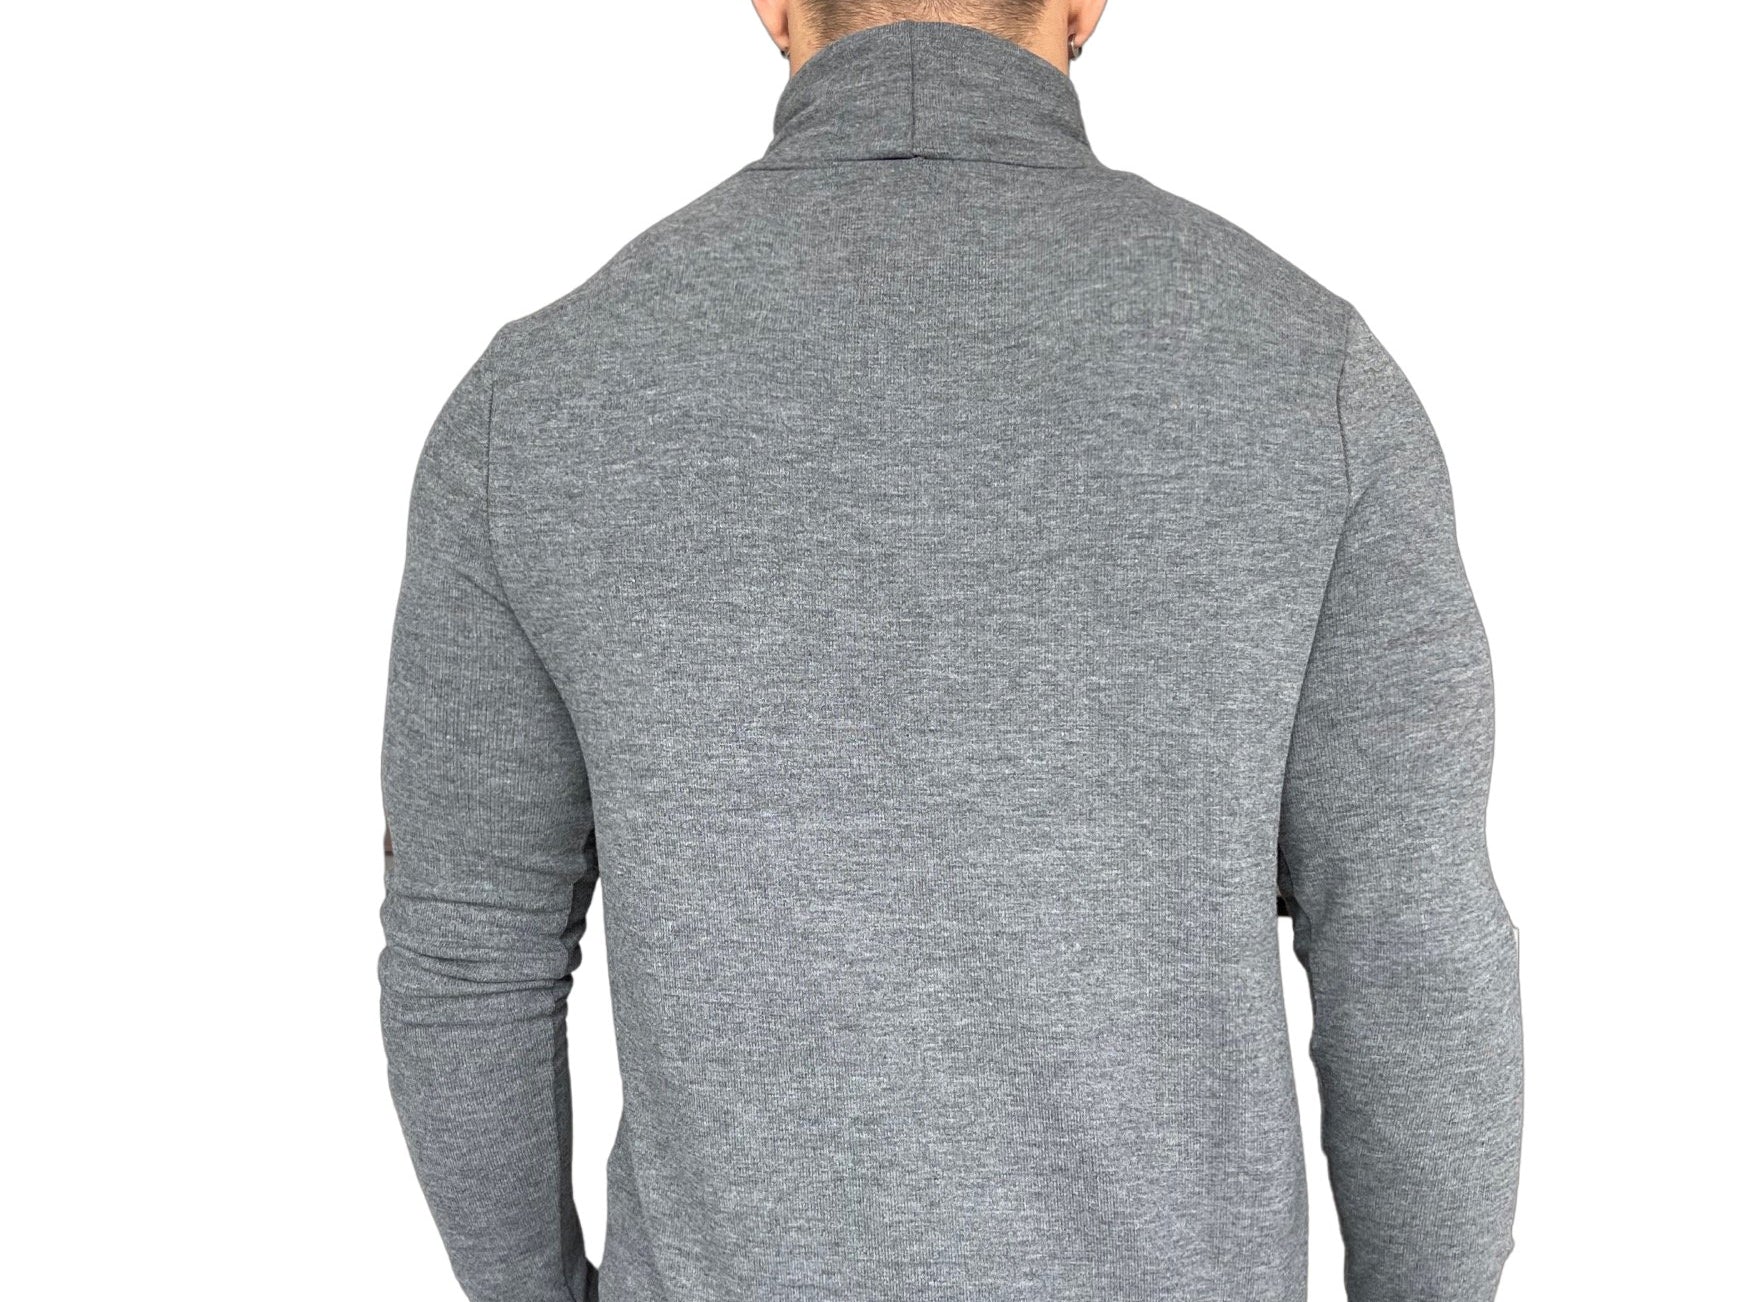 Capitale - Grey Long Sleeve shirt for Men - Sarman Fashion - Wholesale Clothing Fashion Brand for Men from Canada